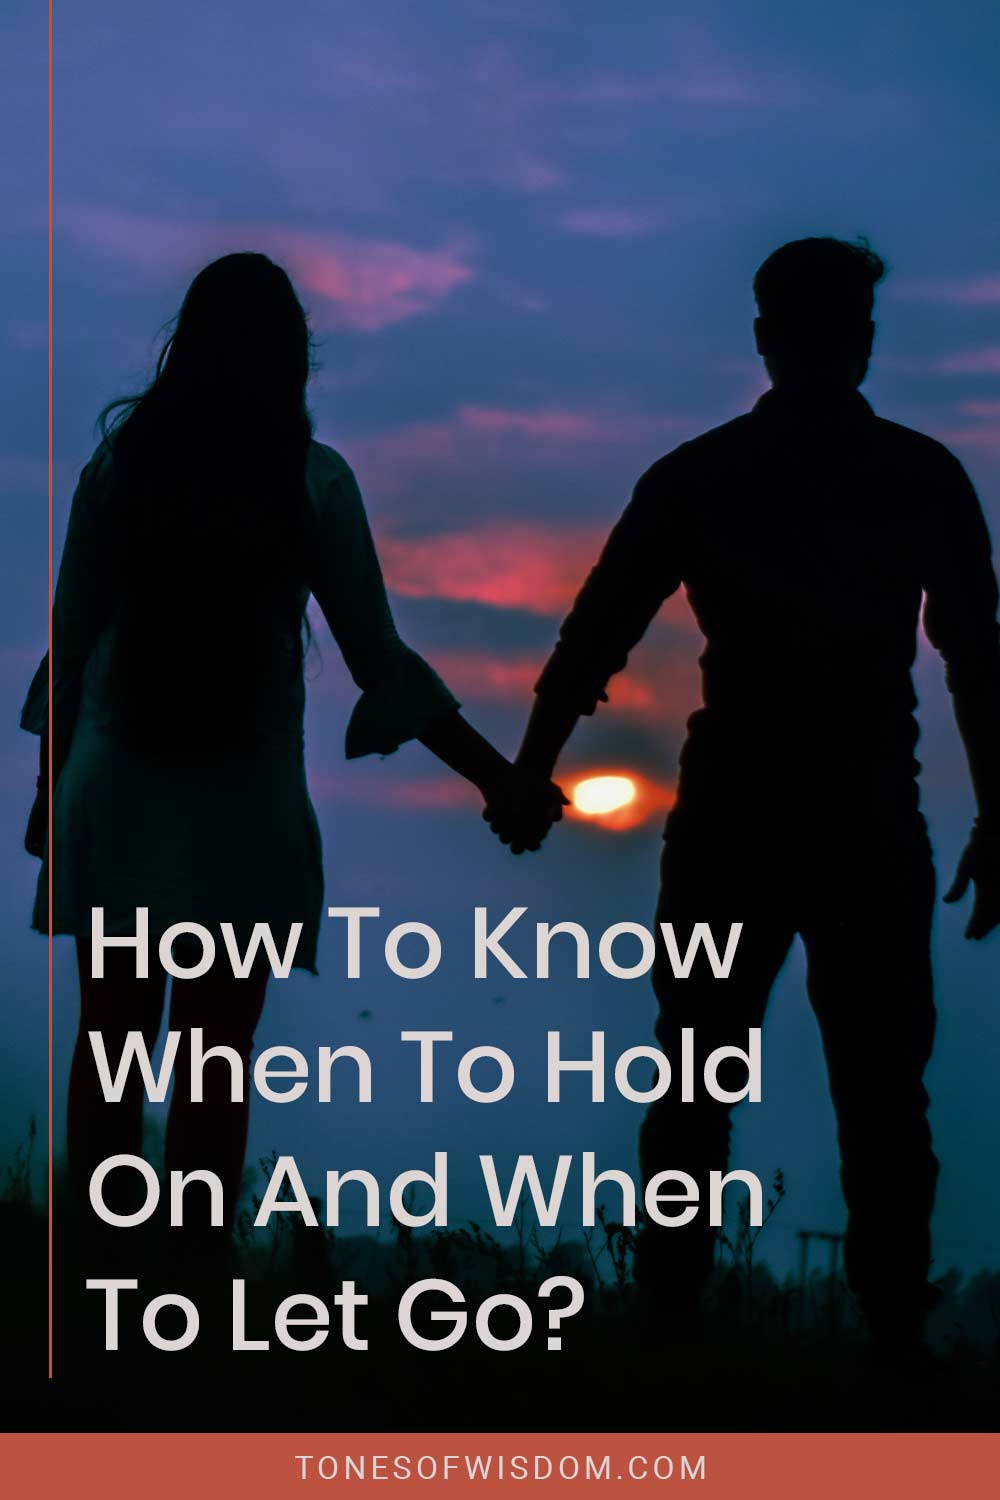 How To Know When To Hold On And When To Let Go?